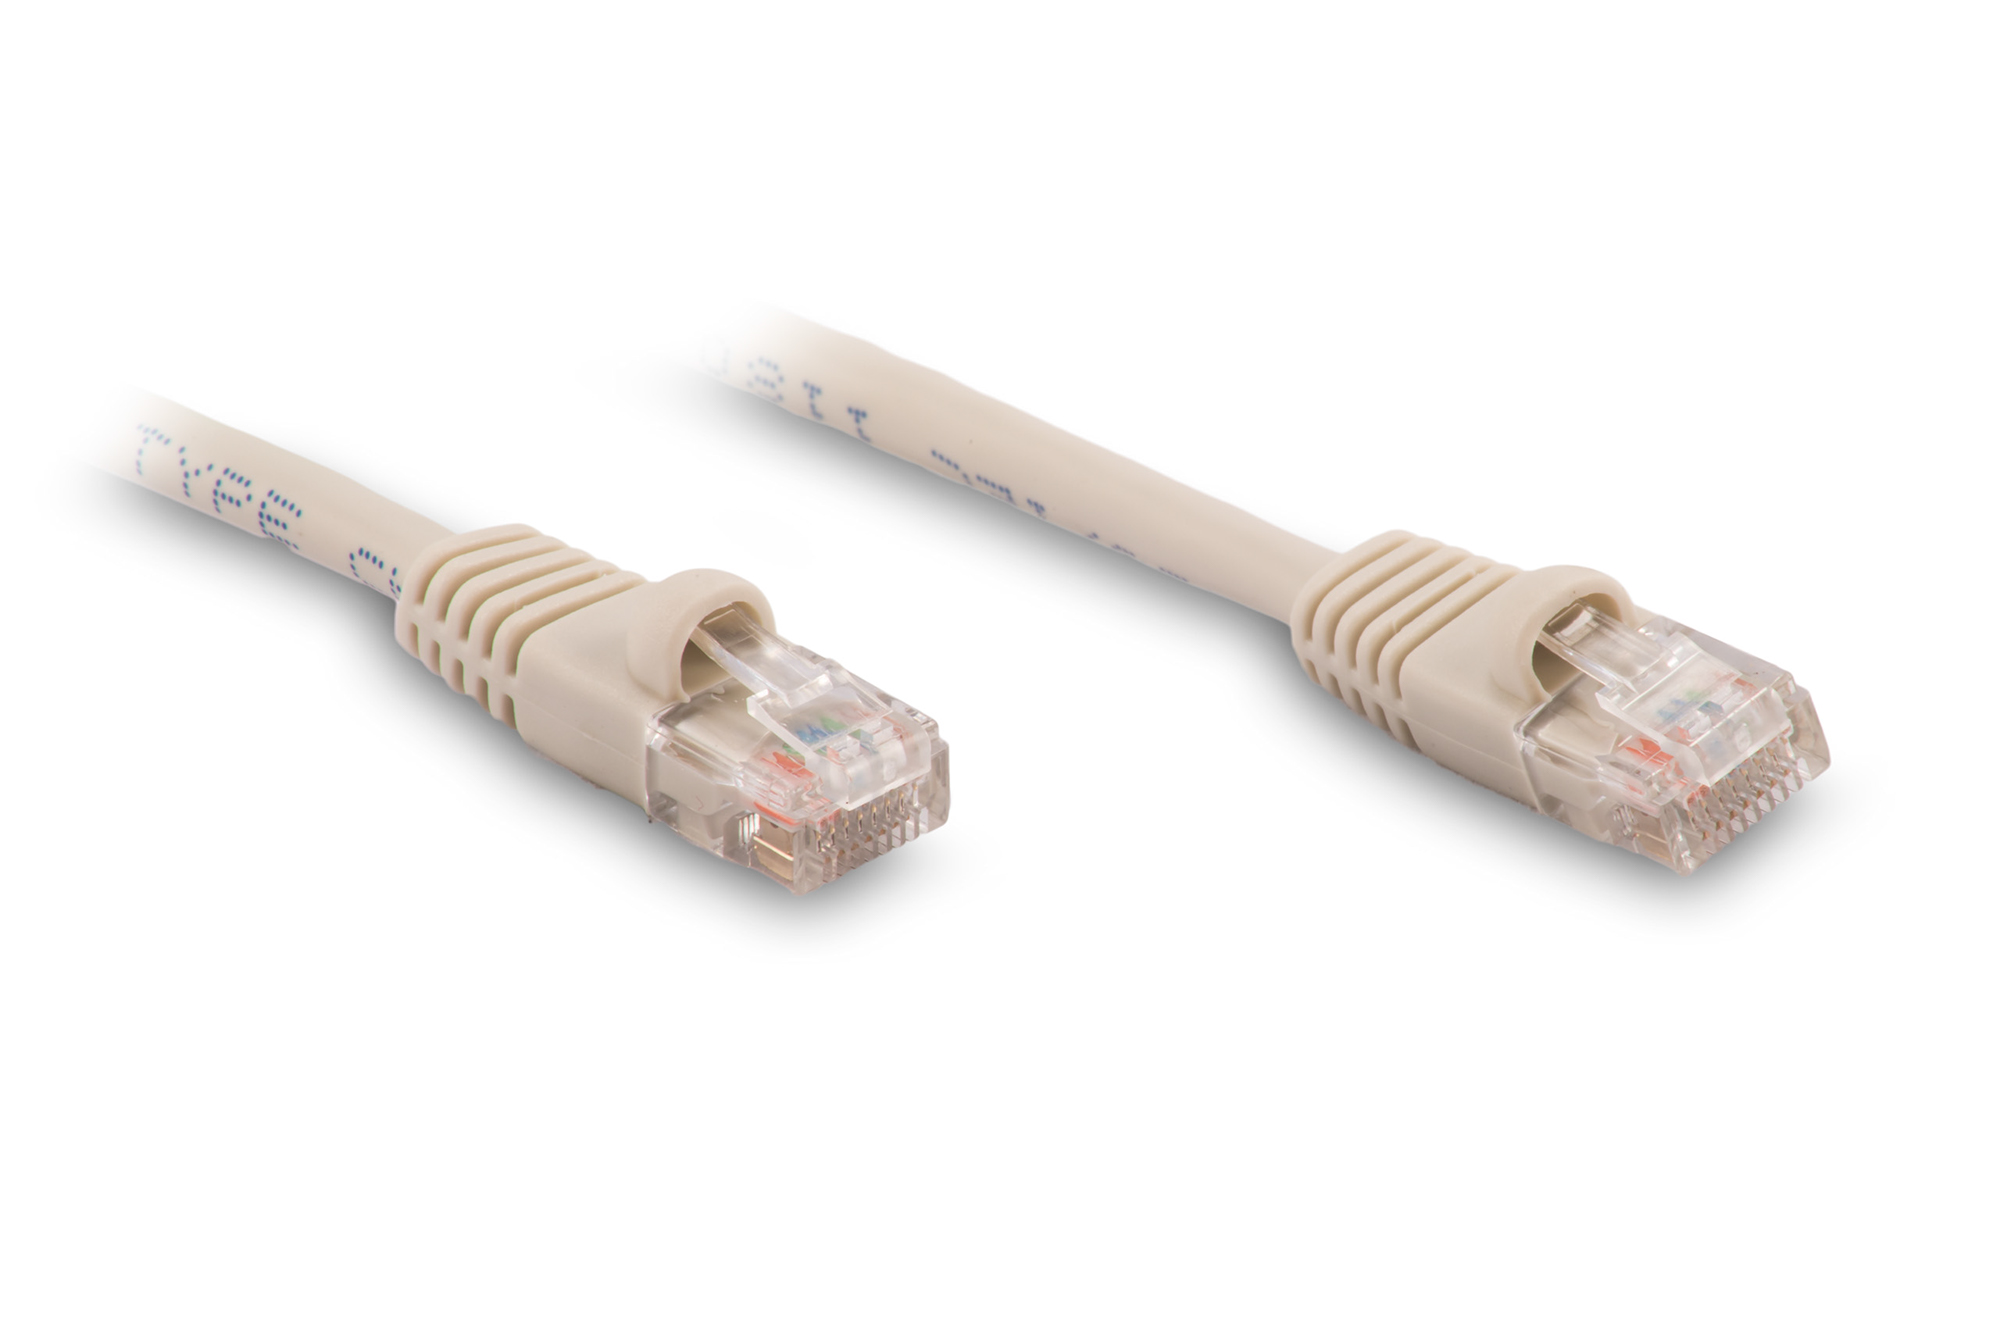 50ft Cat5e Ethernet Patch Cable - Gray Color - Snagless Boot, Stranded, RJ45, 350Mhz, 24AWG